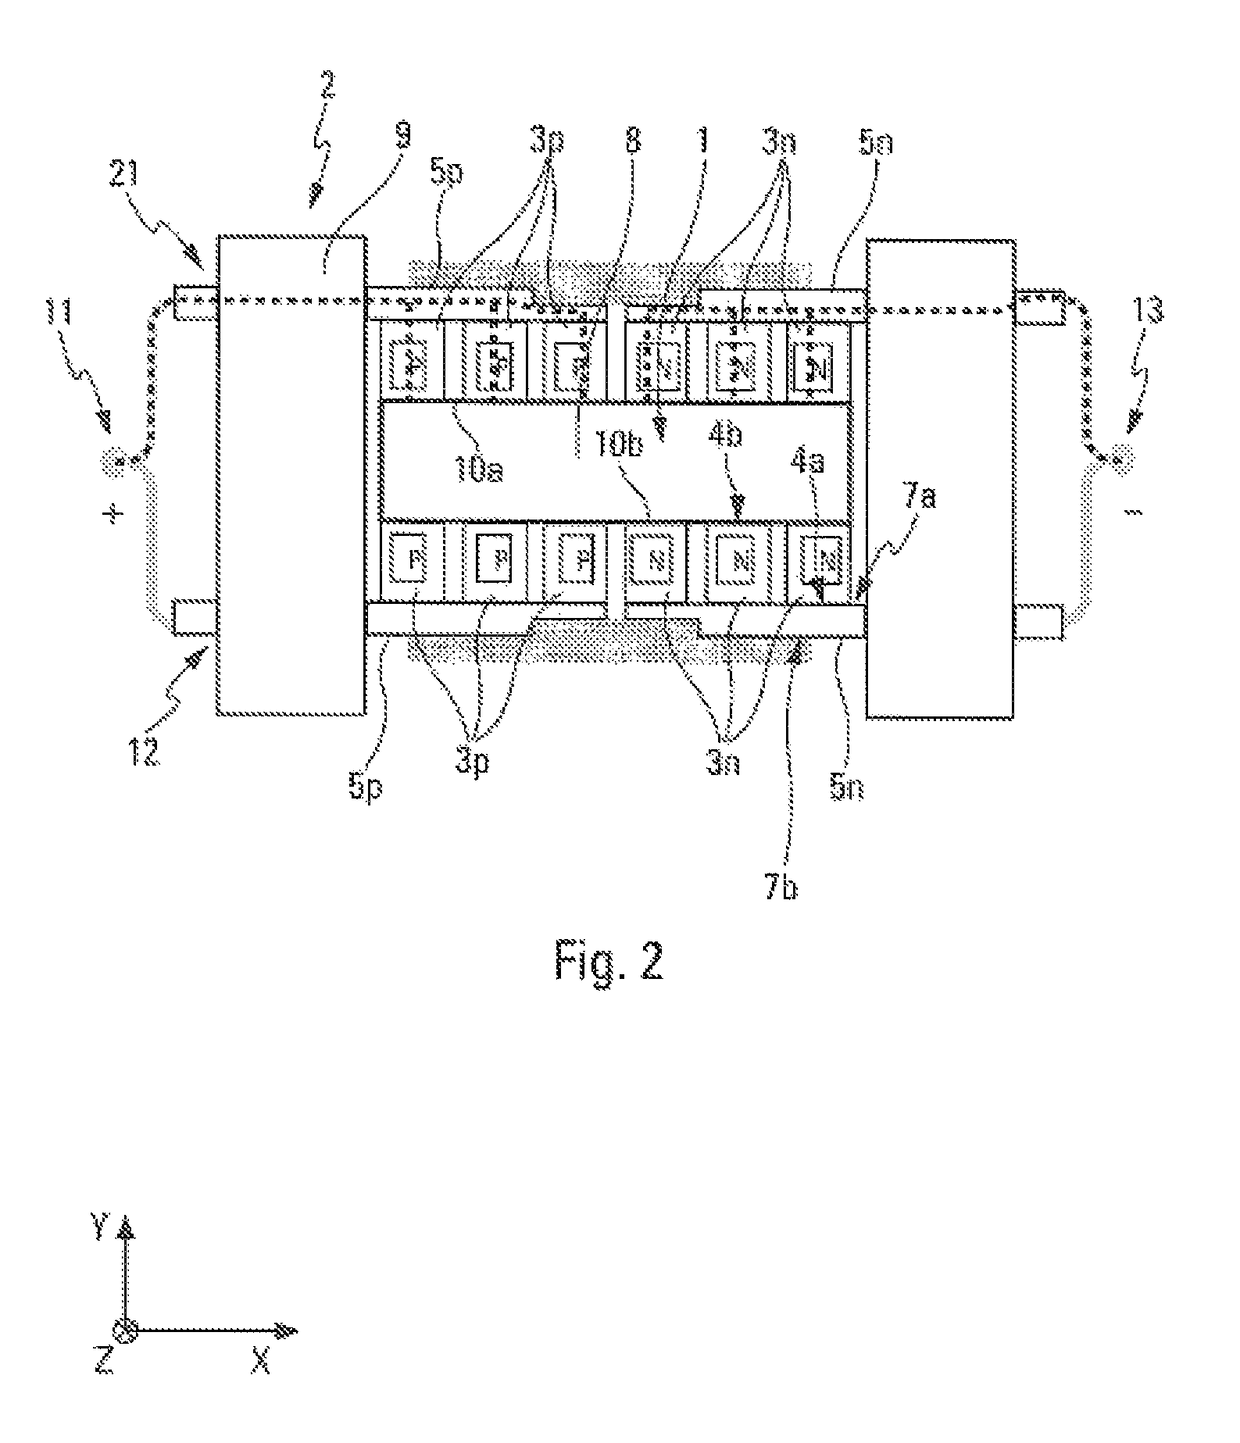 Thermoelectric device, in particular intended to generate an electric current in a motor vehicle